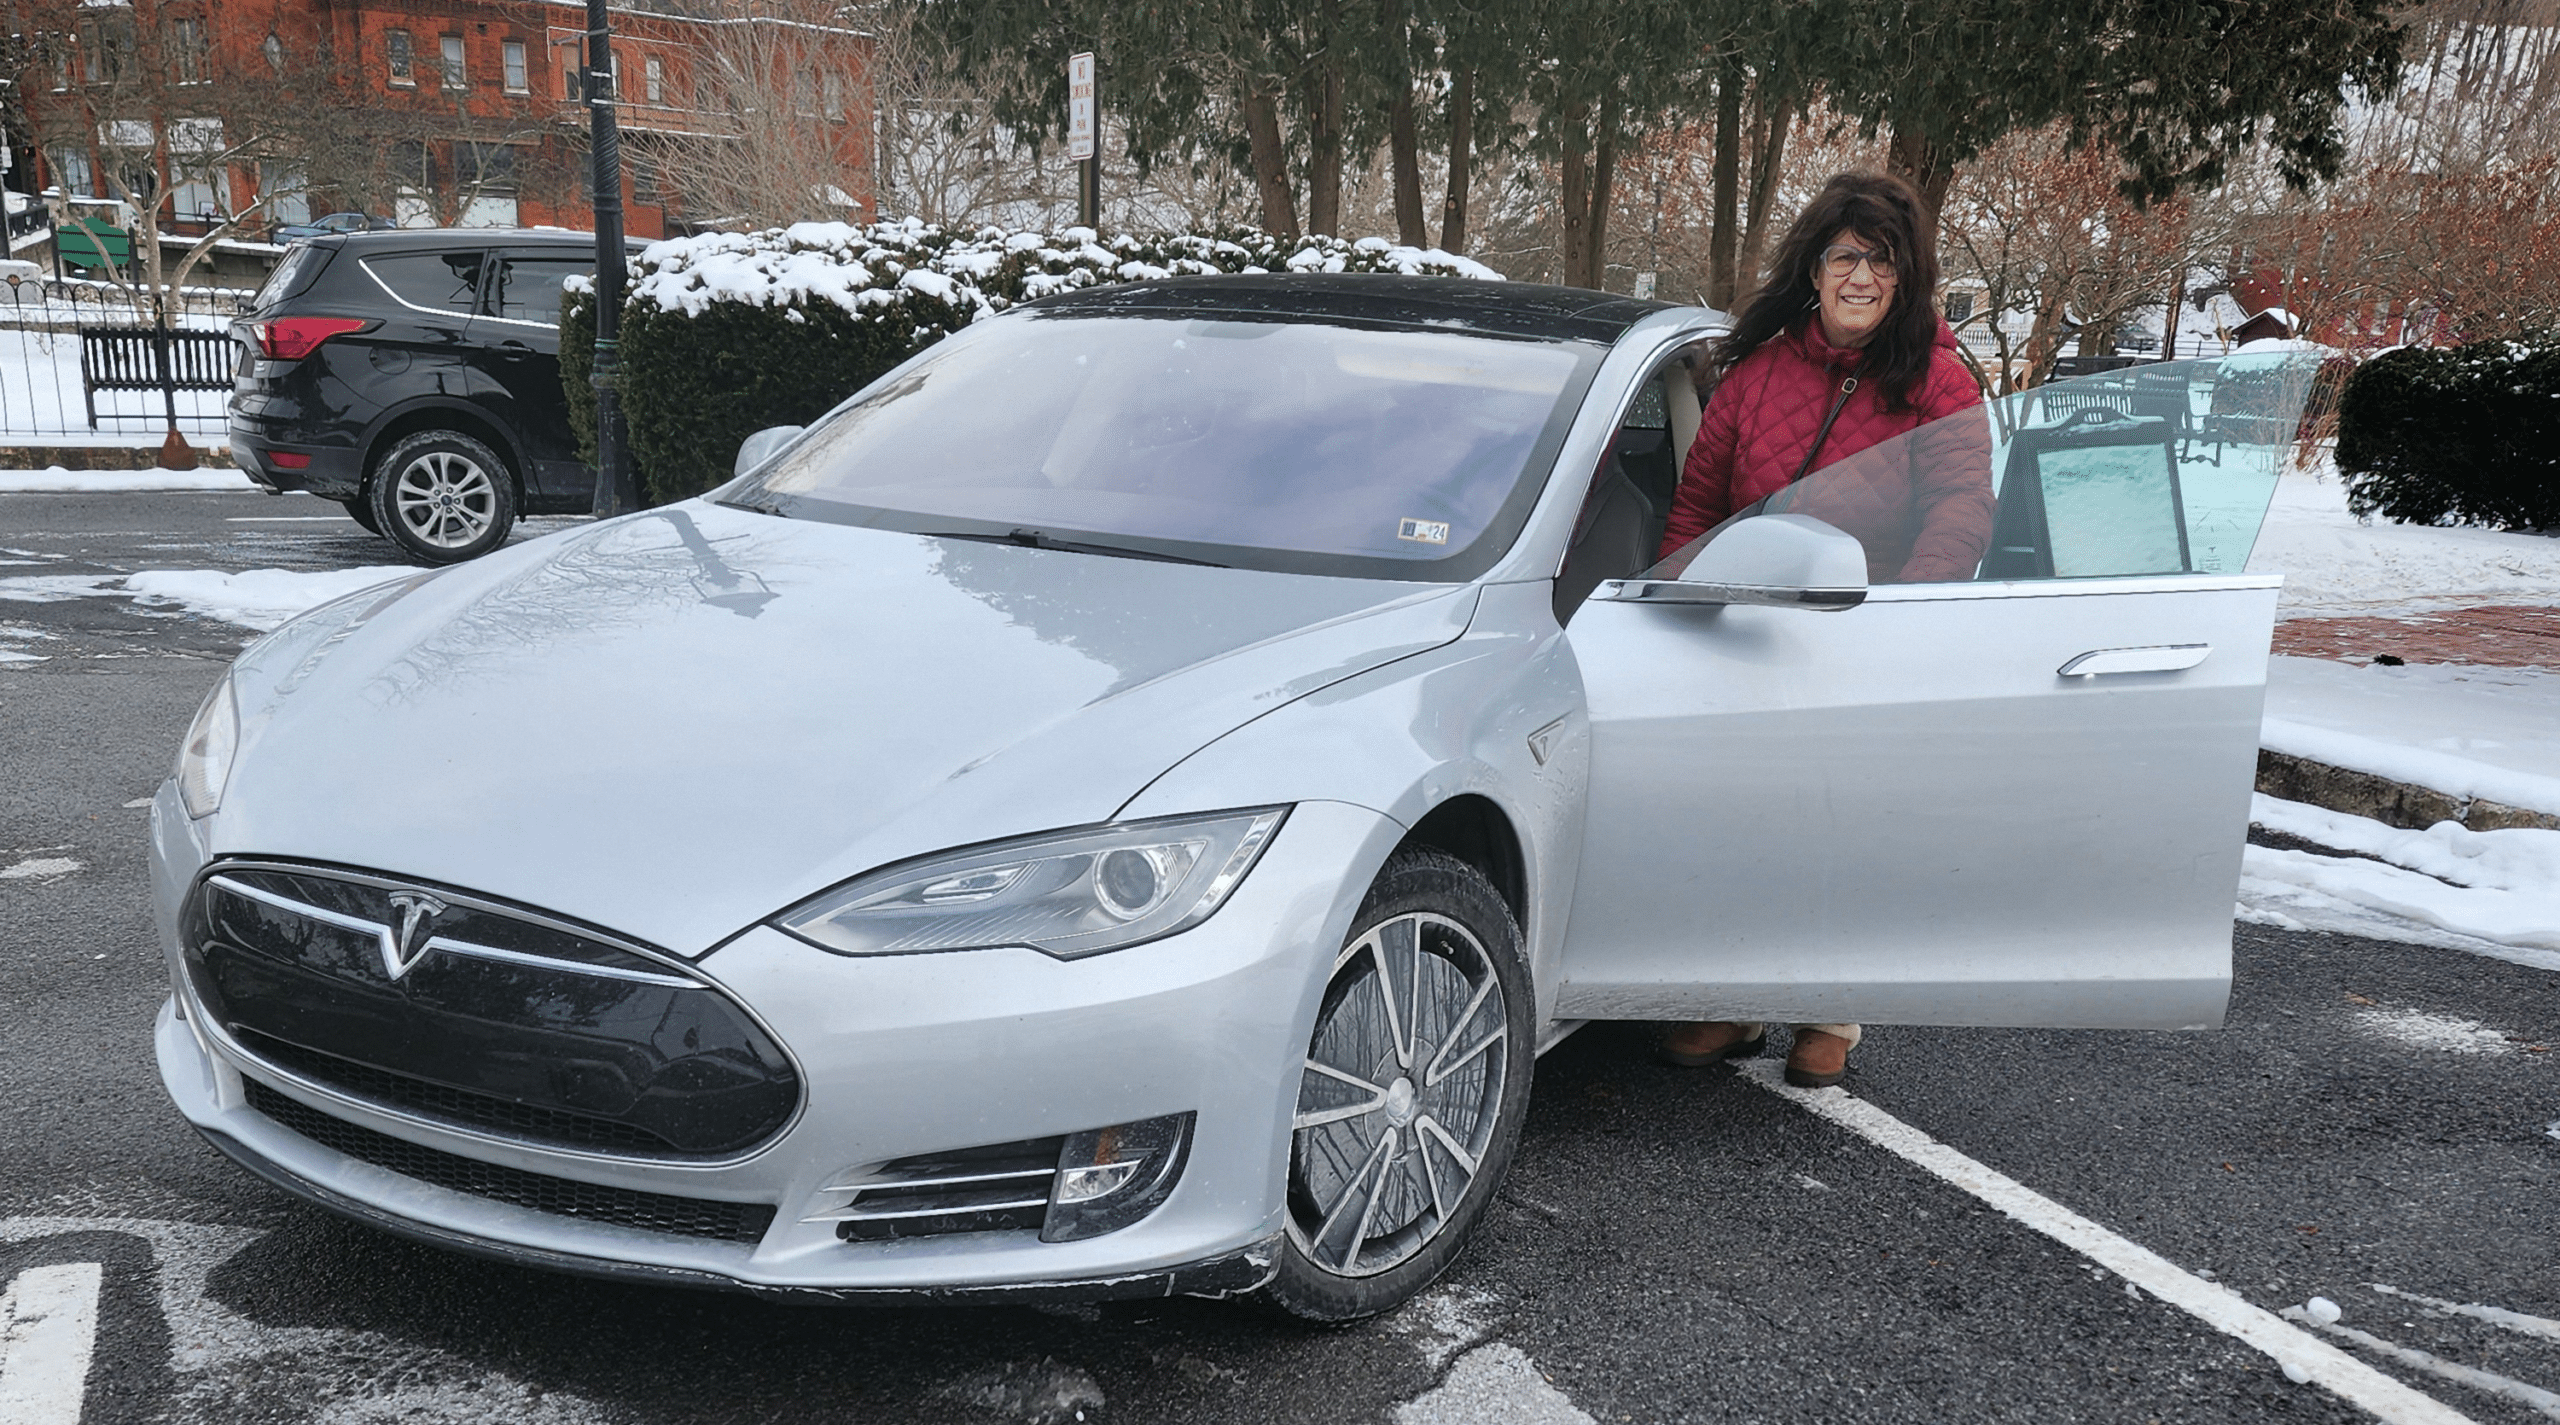 Joanne With her Tesla At Talleyrand Park Bellefonte, PA